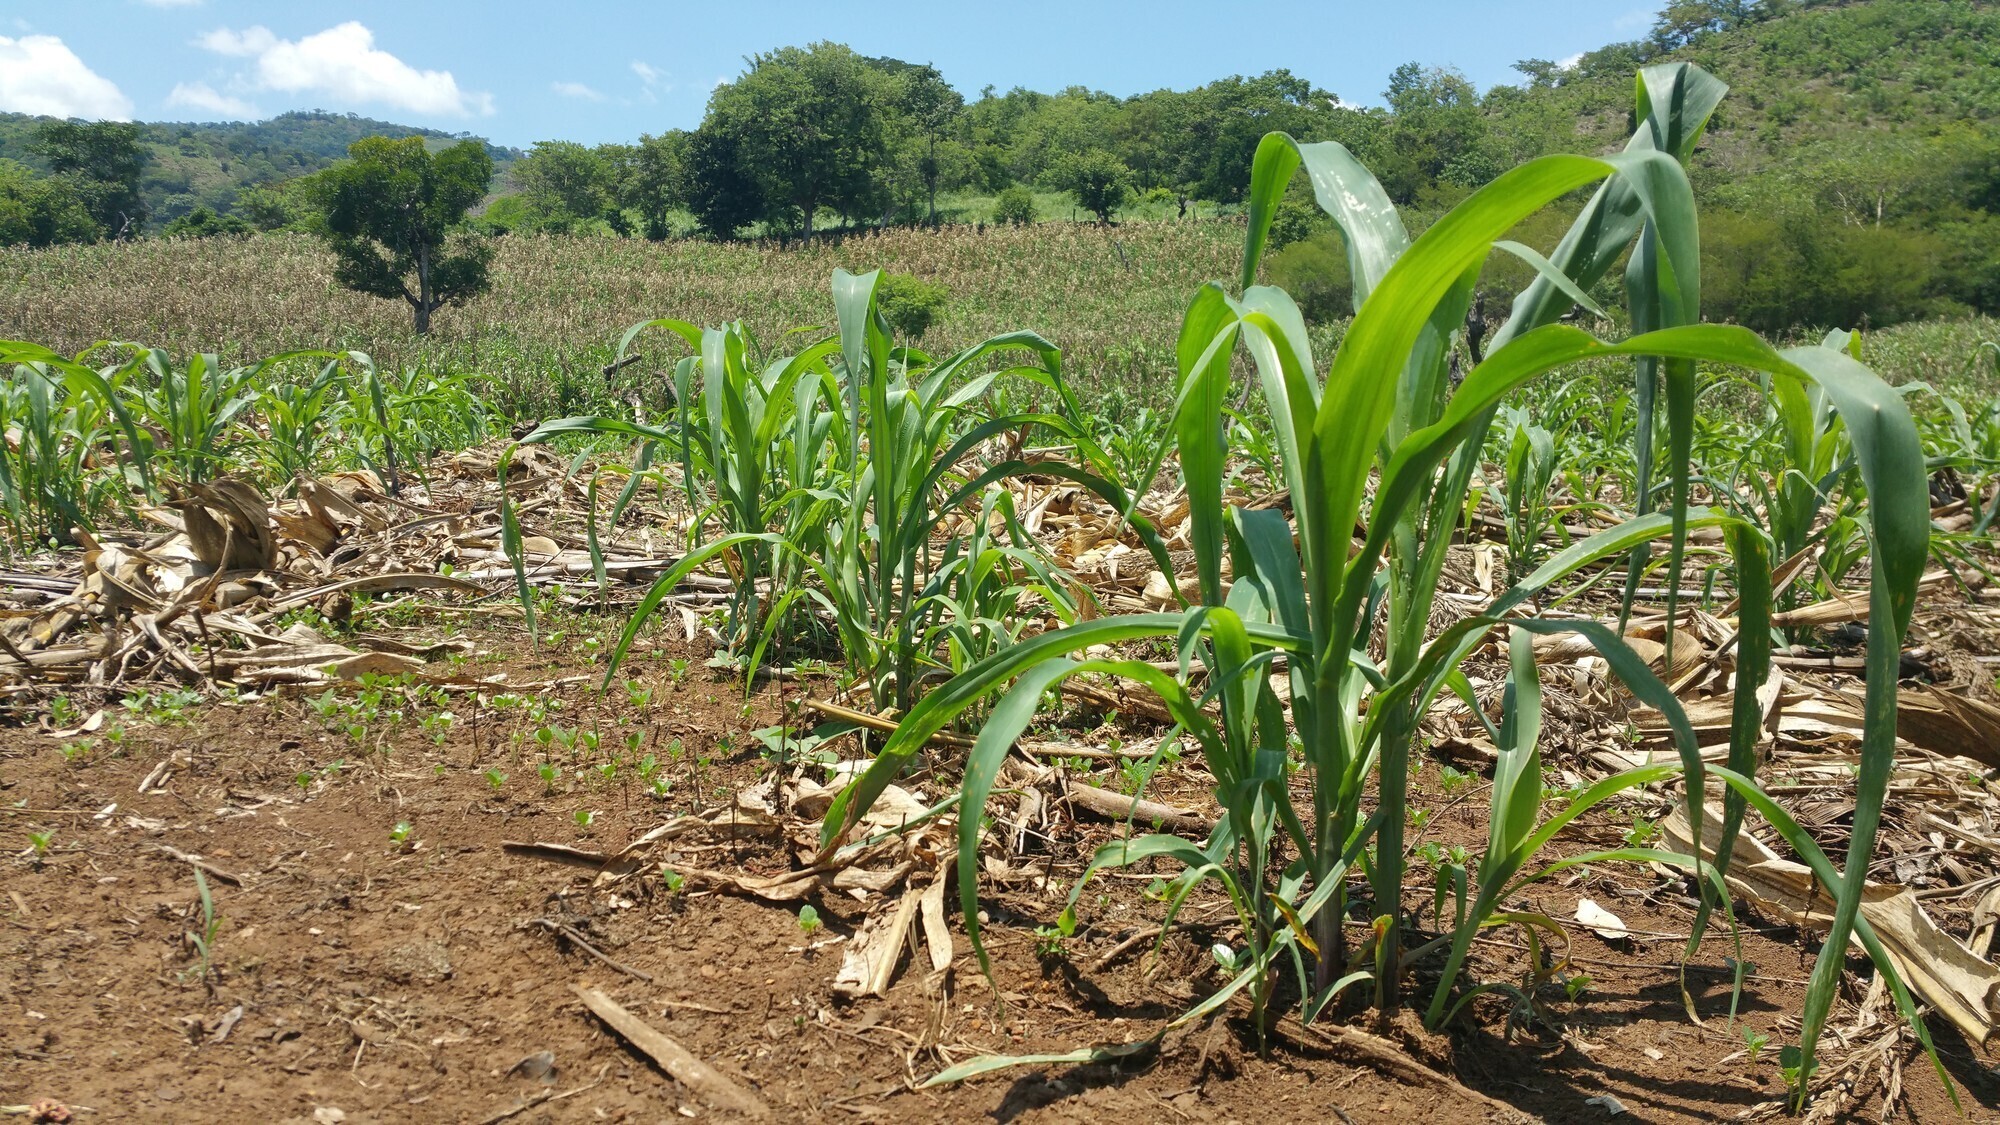 A field of corn and maicillo grow side-by-side in field